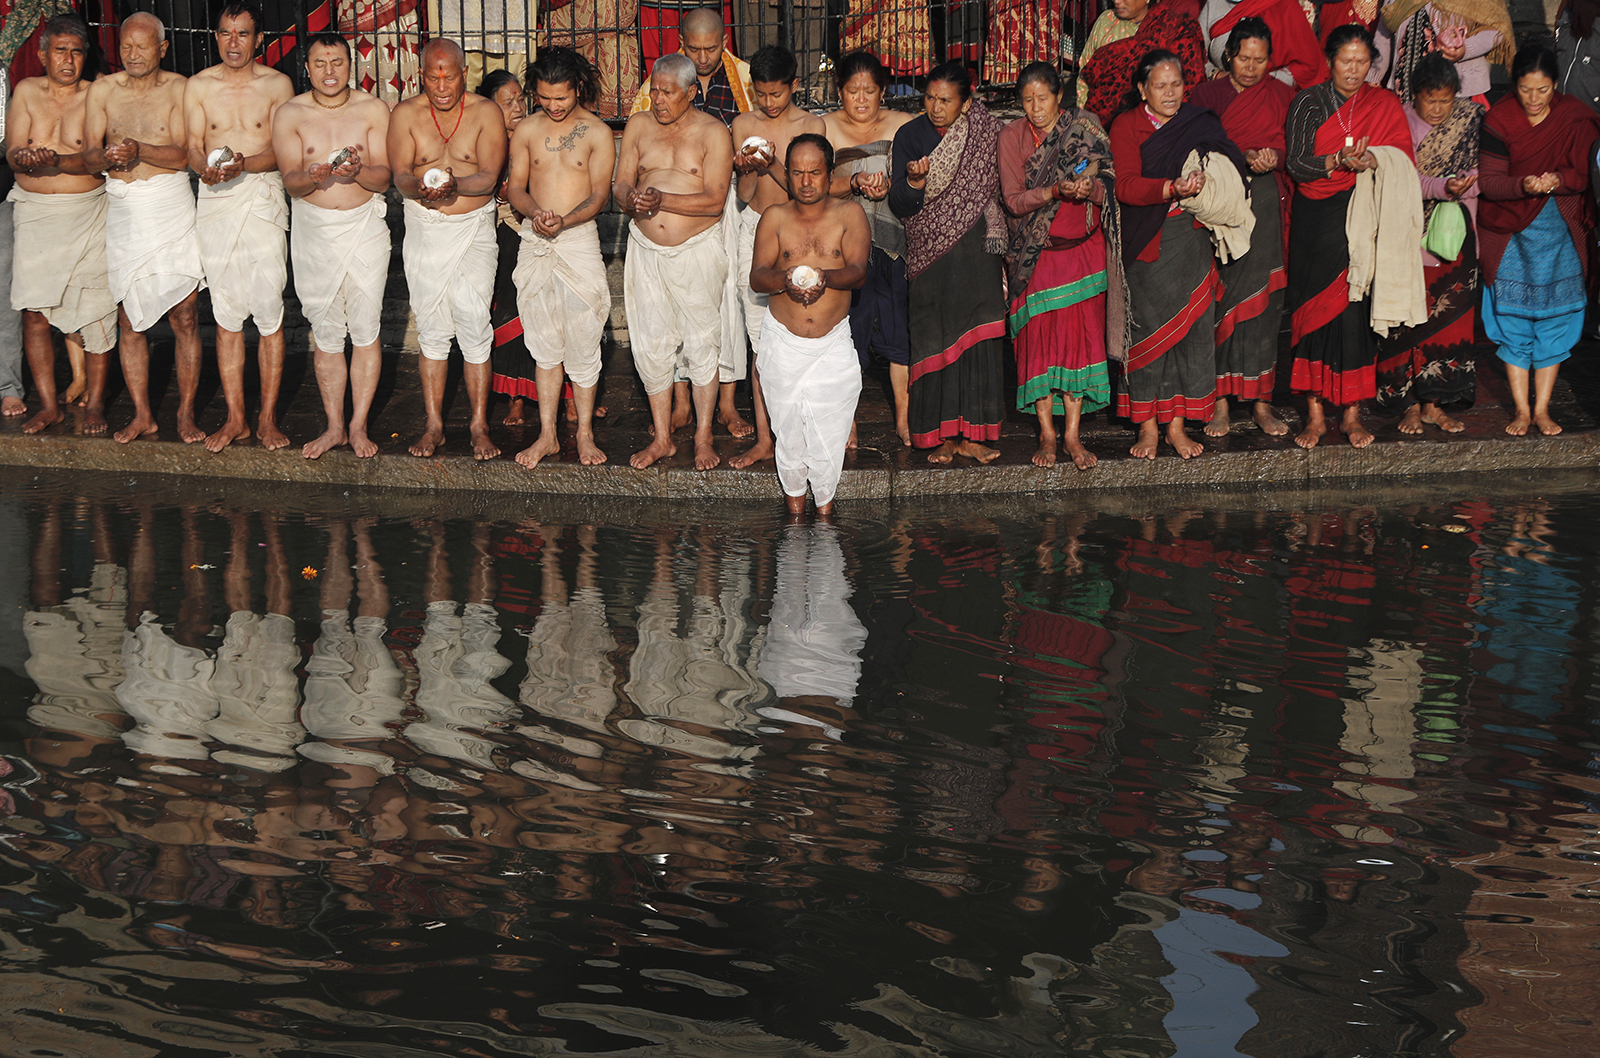 Nepalese Hindu devotees offer prayers during Madhav Narayan Festival along the banks of the Hanumante river in Bhaktapur, Nepal, Thursday, Jan. 28, 2021. During the festival, devotees recite holy scriptures dedicated to Hindu goddess Swasthani and Lord Shiva. Unmarried women pray to get a good husband while those married pray for the longevity of their husbands by observing a month-long fast. (AP Photo/Niranjan Shrestha)